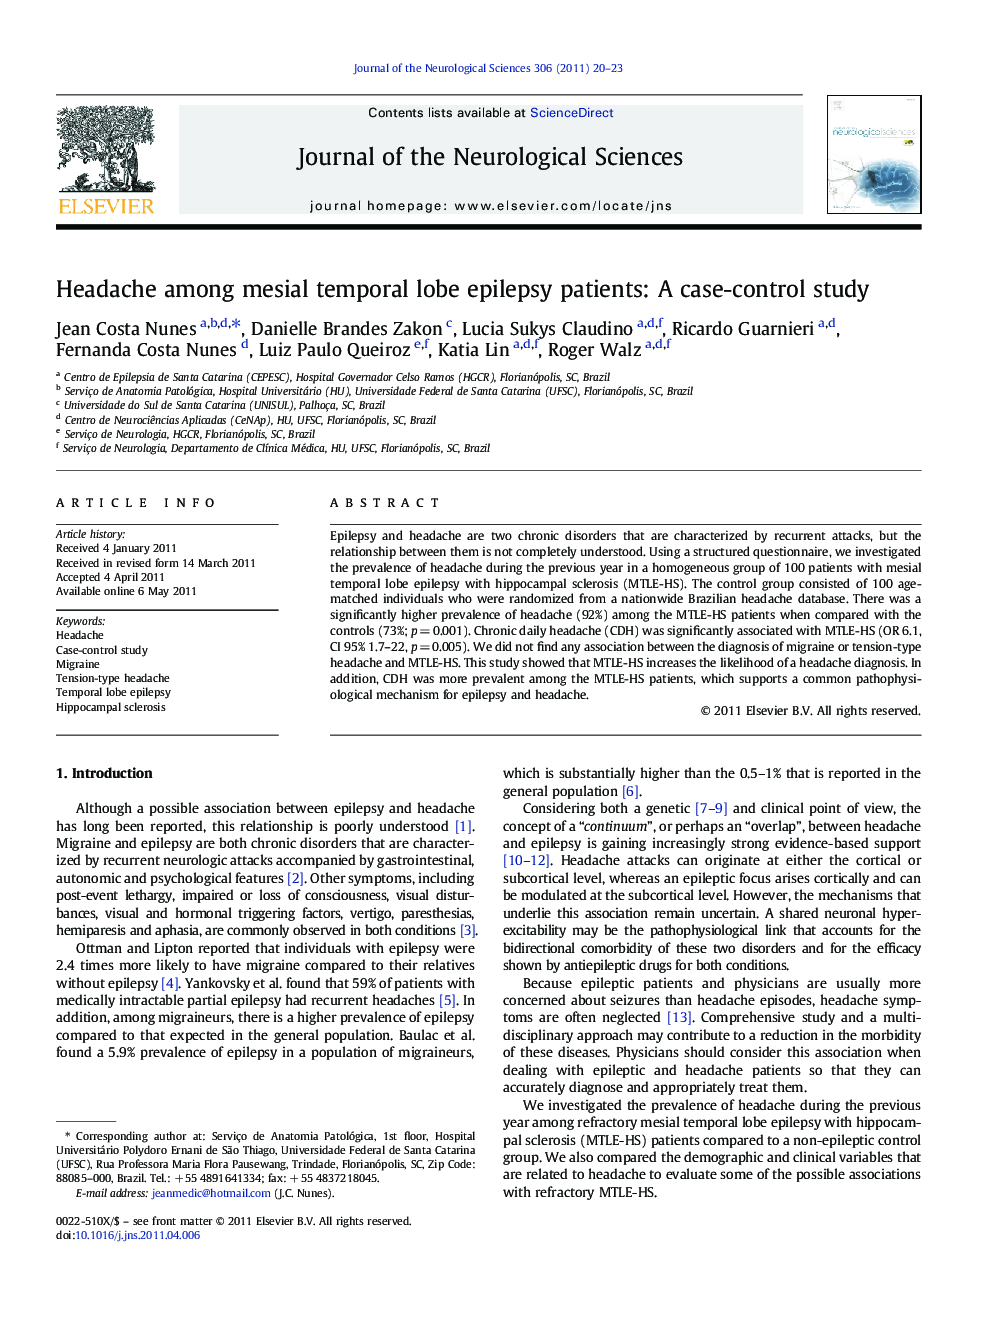 Headache among mesial temporal lobe epilepsy patients: A case-control study